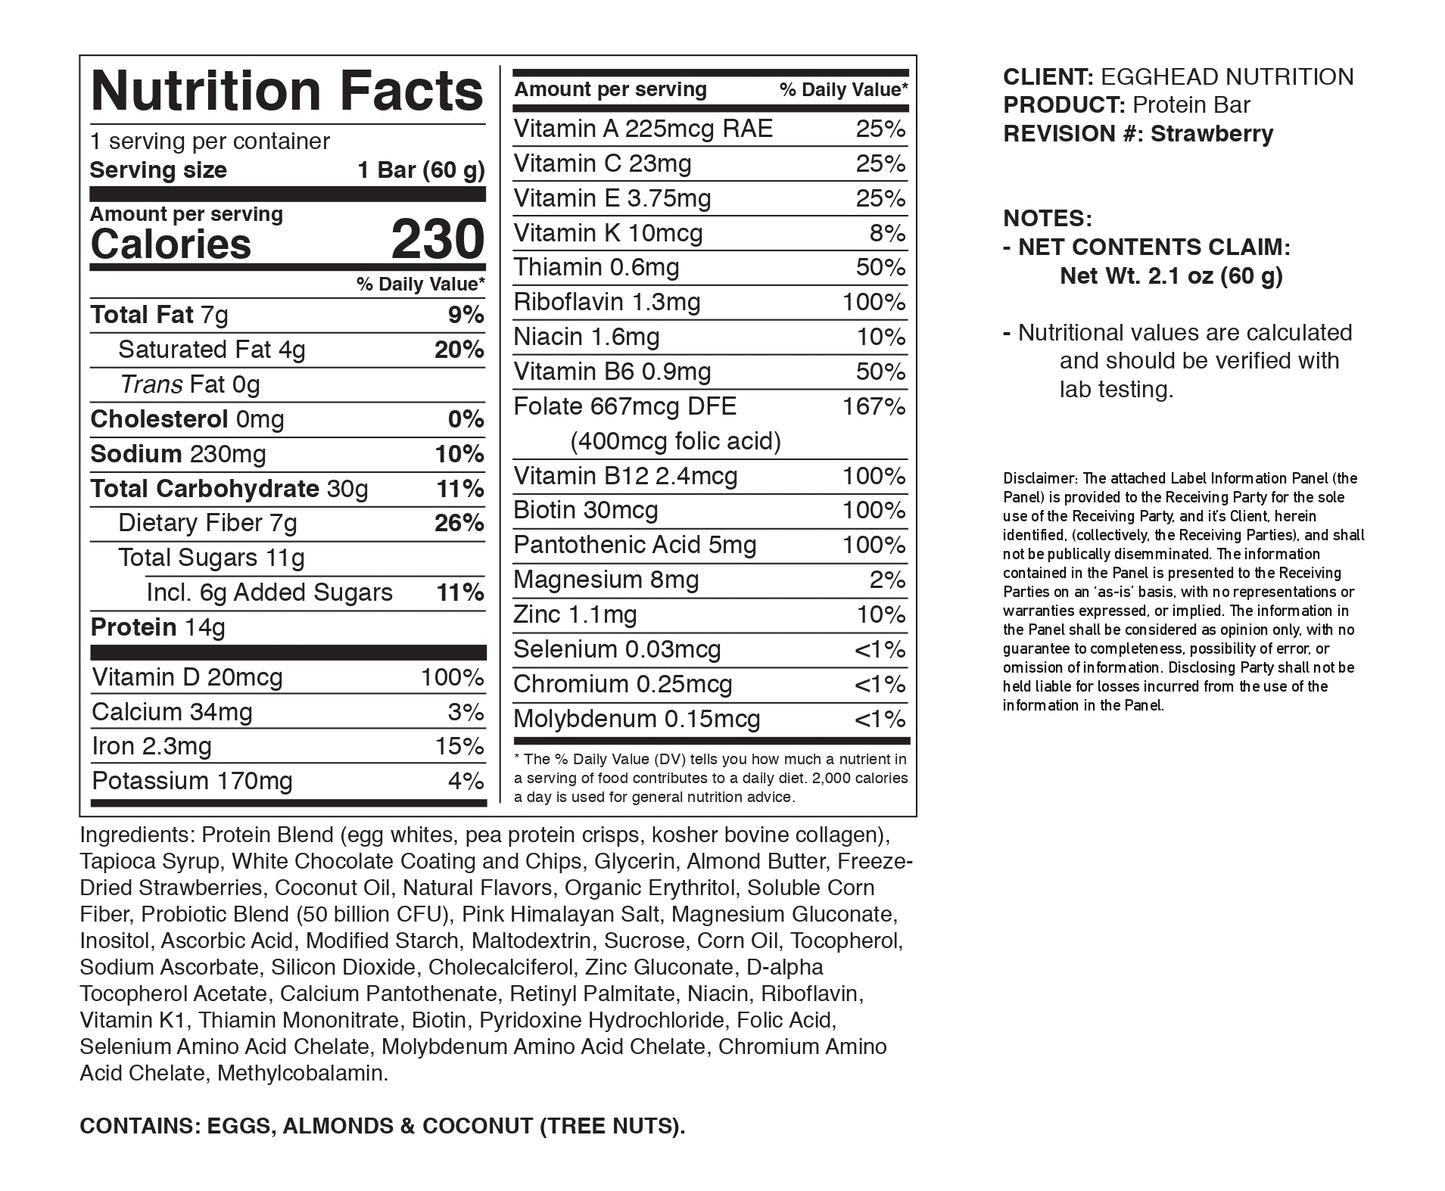 Protein Bar - Nutrition Facts